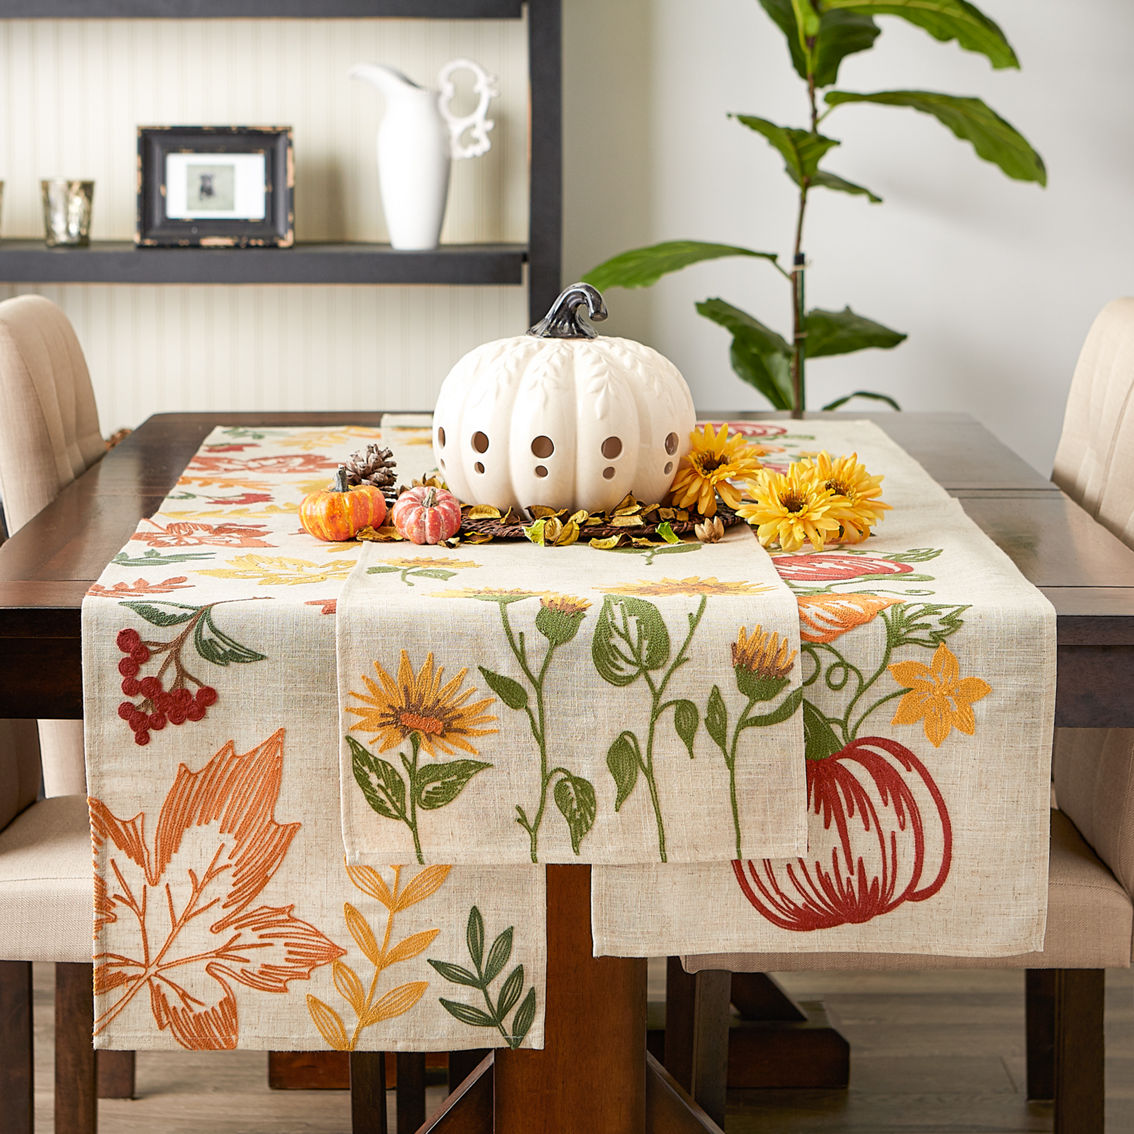 Design Imports 14 x 70 in. Pumpkin Vine Embroidered Table Runner - Image 5 of 8